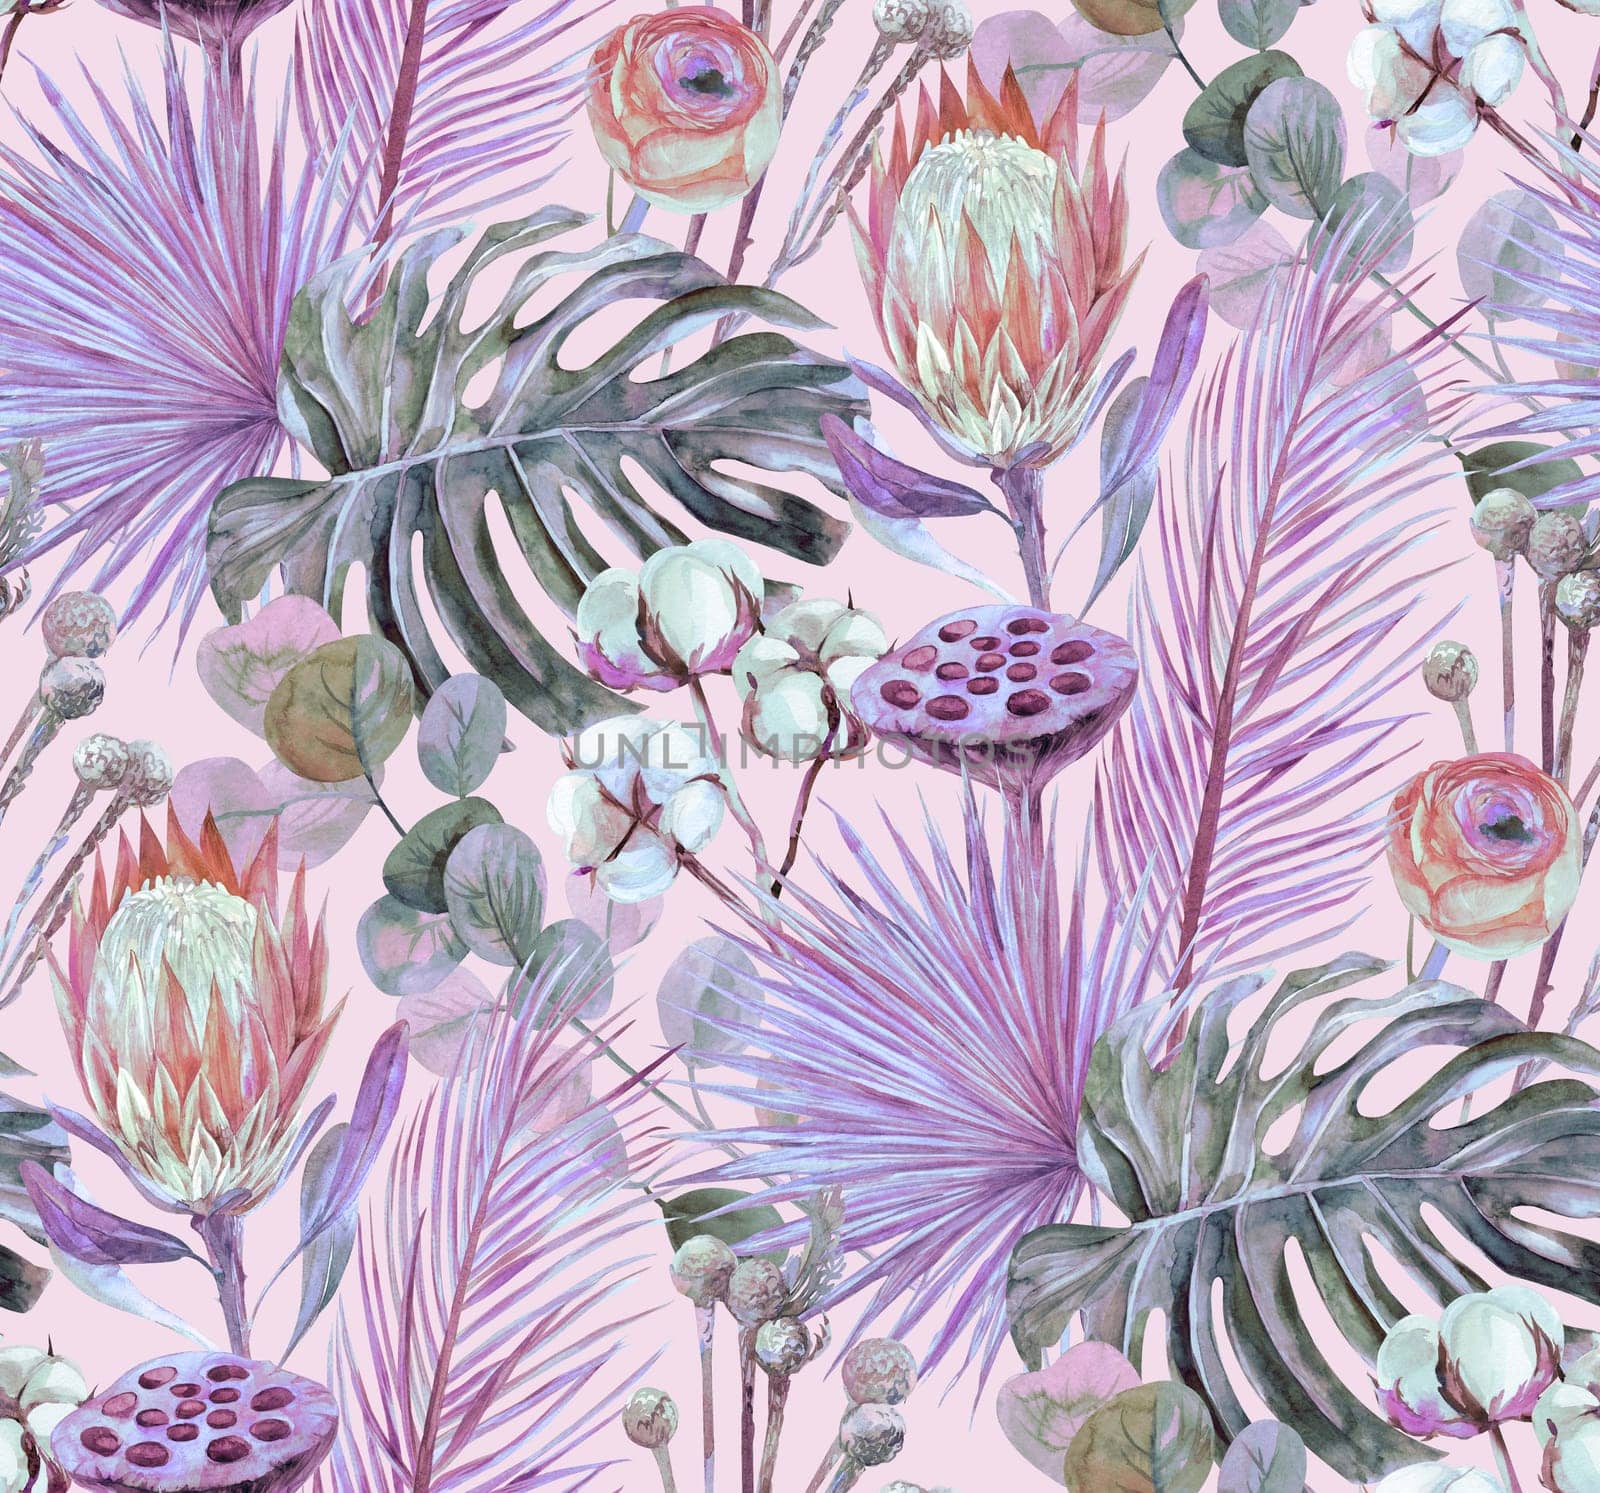 watercolor fashion floral pattern with tropical dried flowers for textile and surface design with shades of purple. With protea flowers and monstera leaves